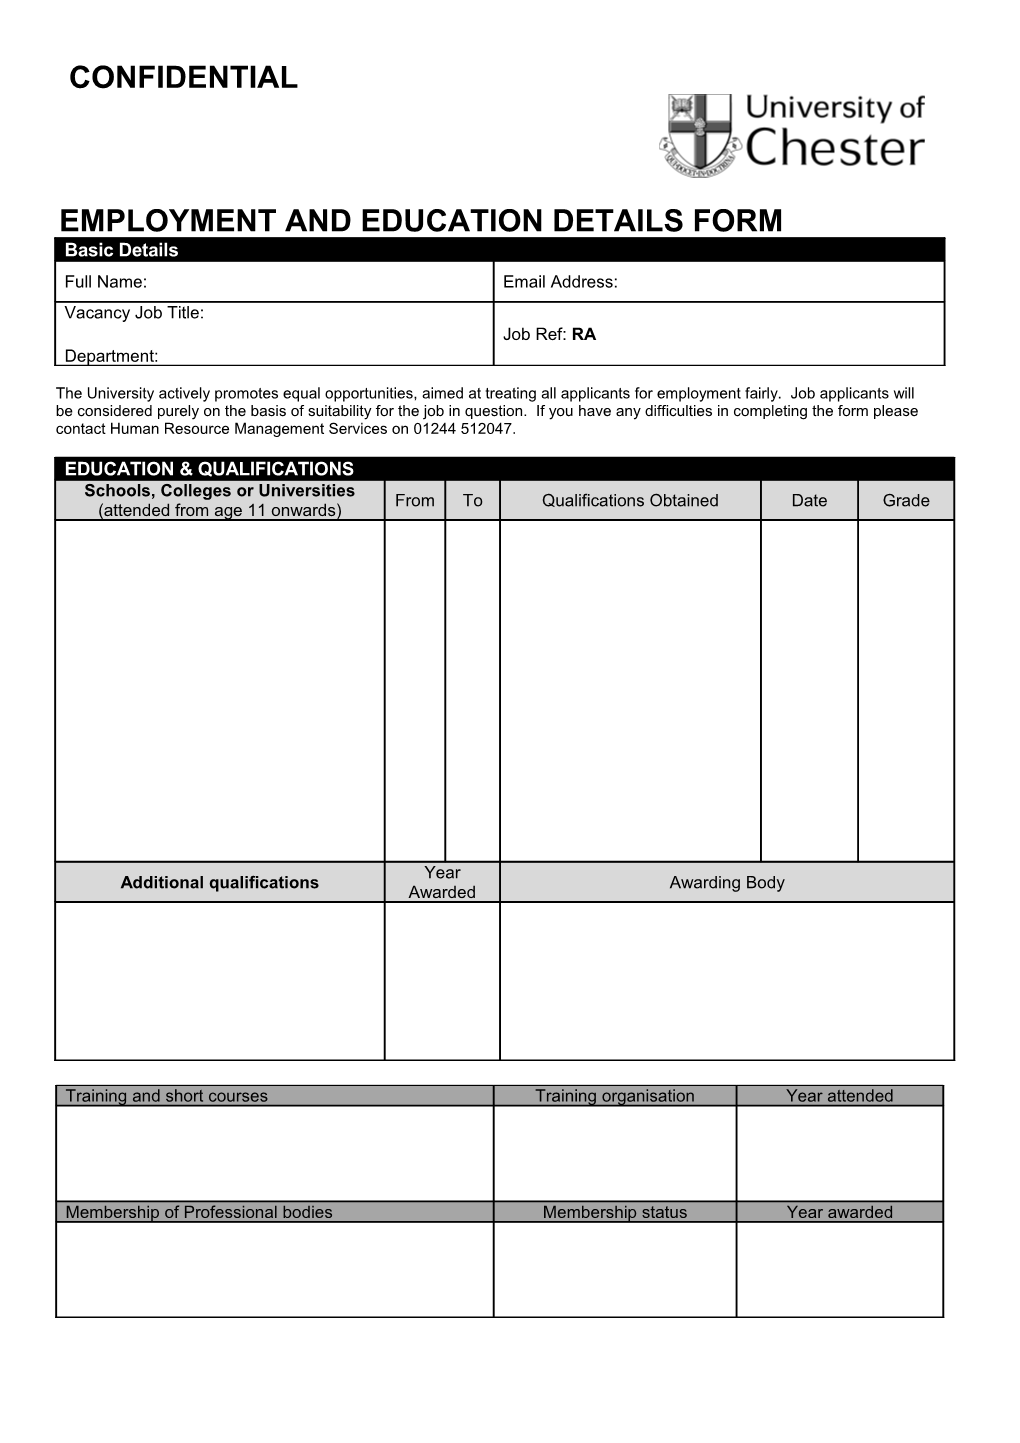 Employment and Education Details Form